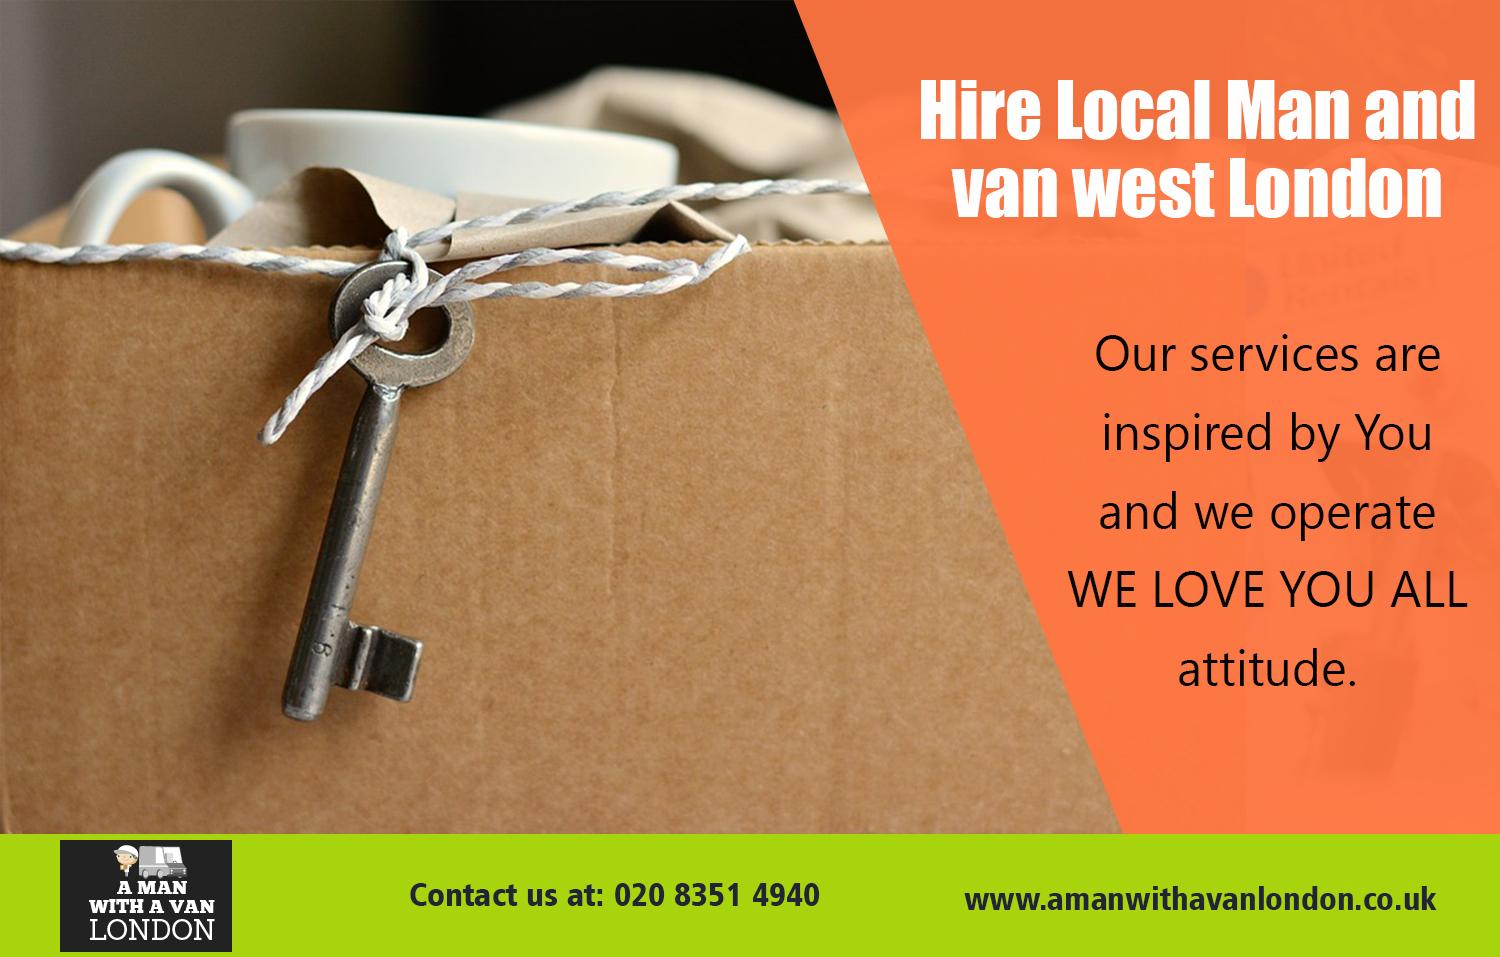  Hire Local Man and a van London